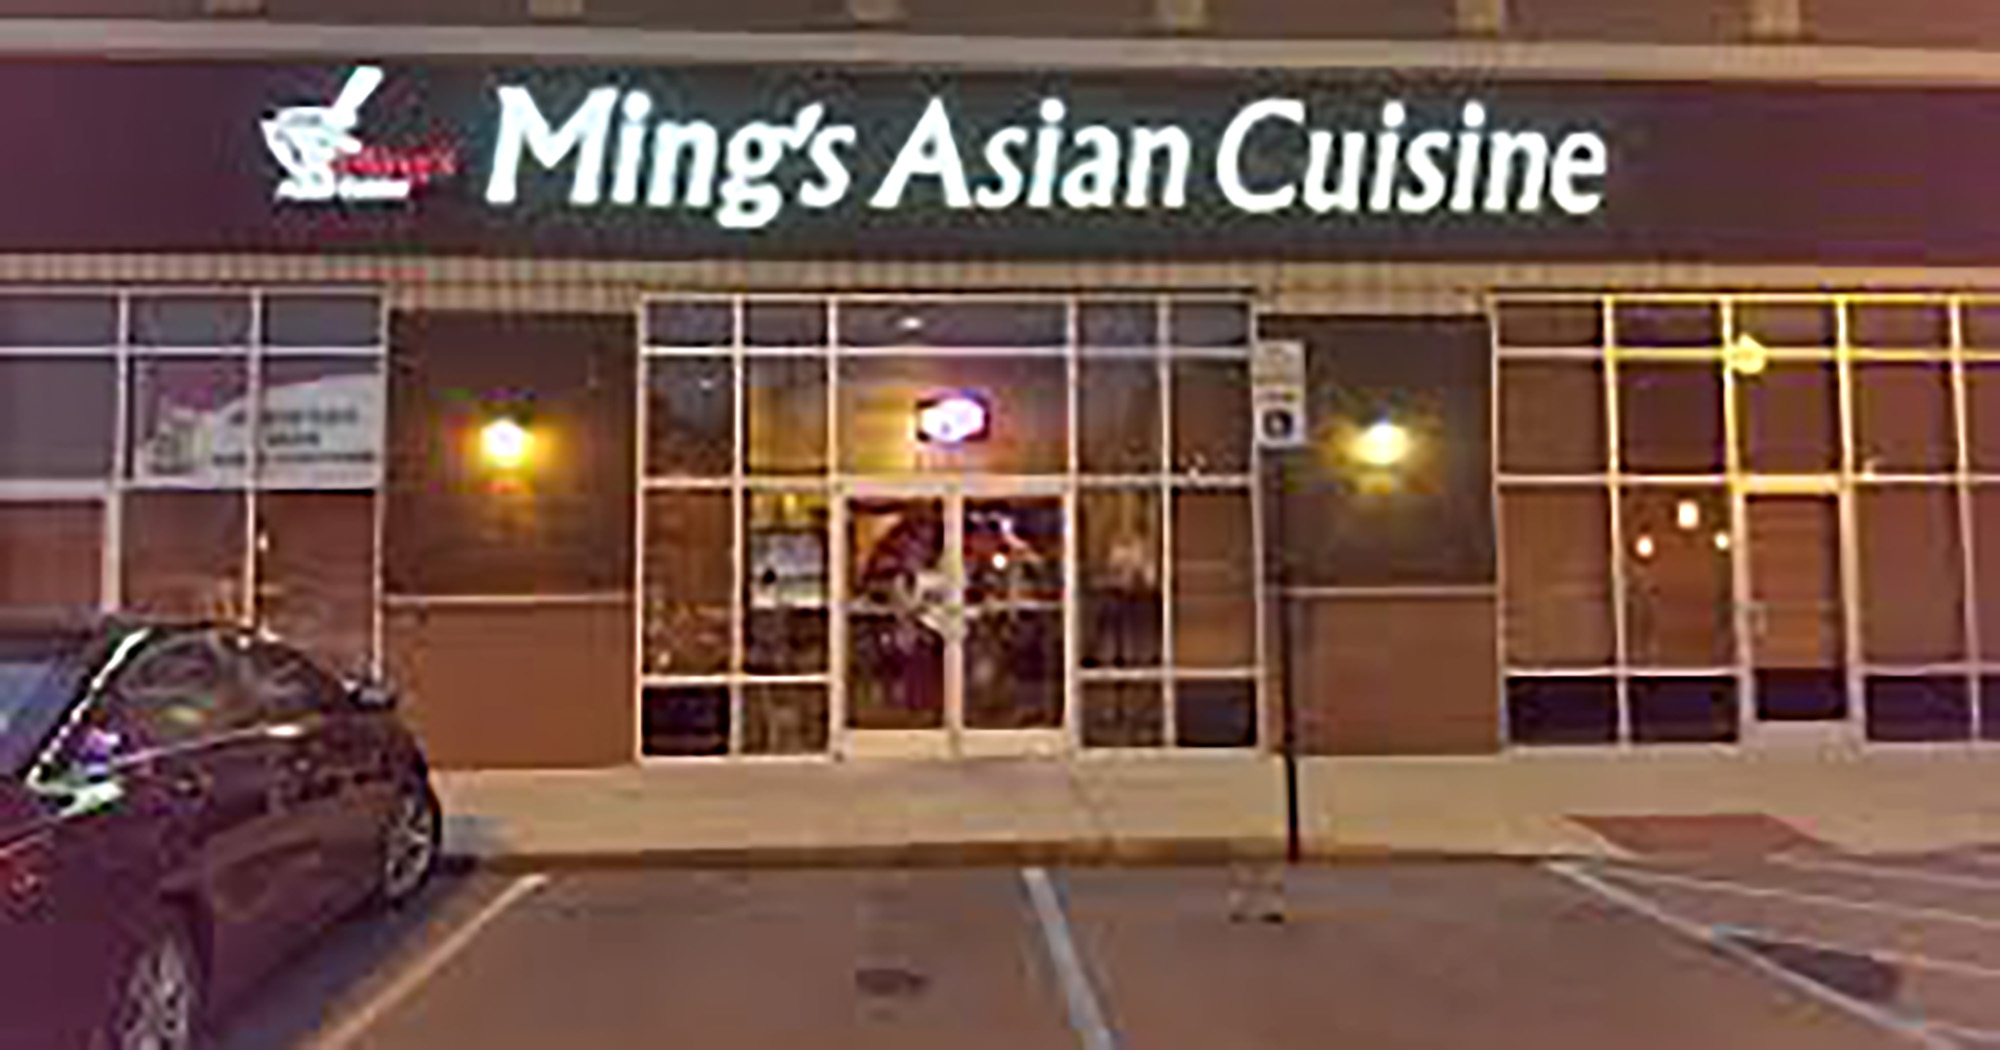 image for Ming’s Asian Cuisine